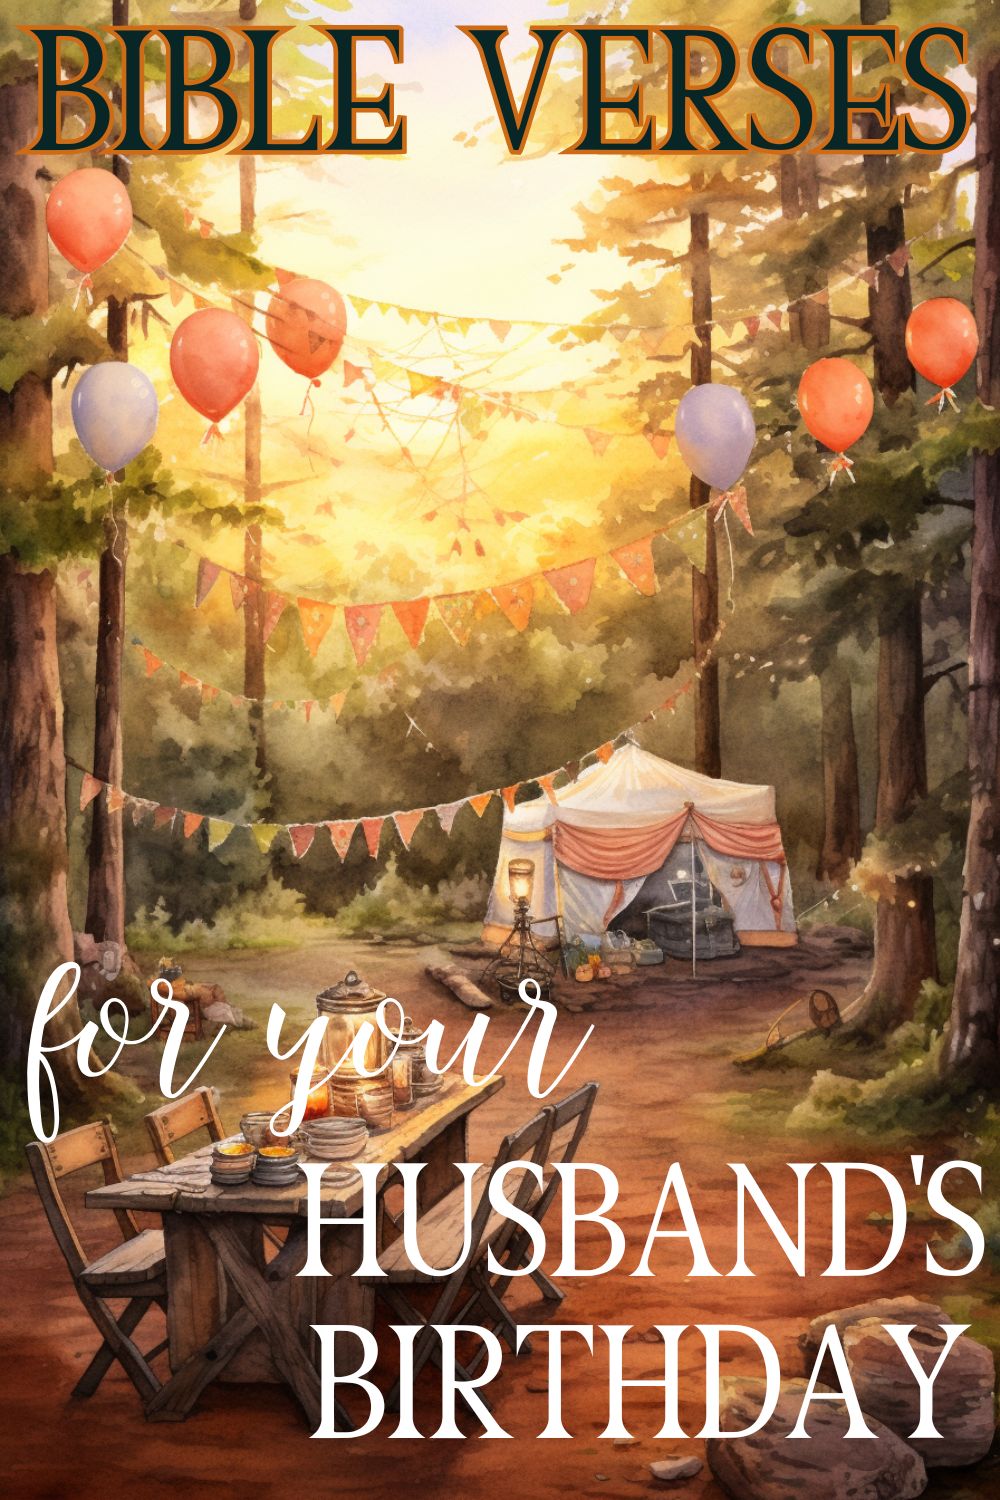 Pin image for blog post on Bible verses for husbands birthday